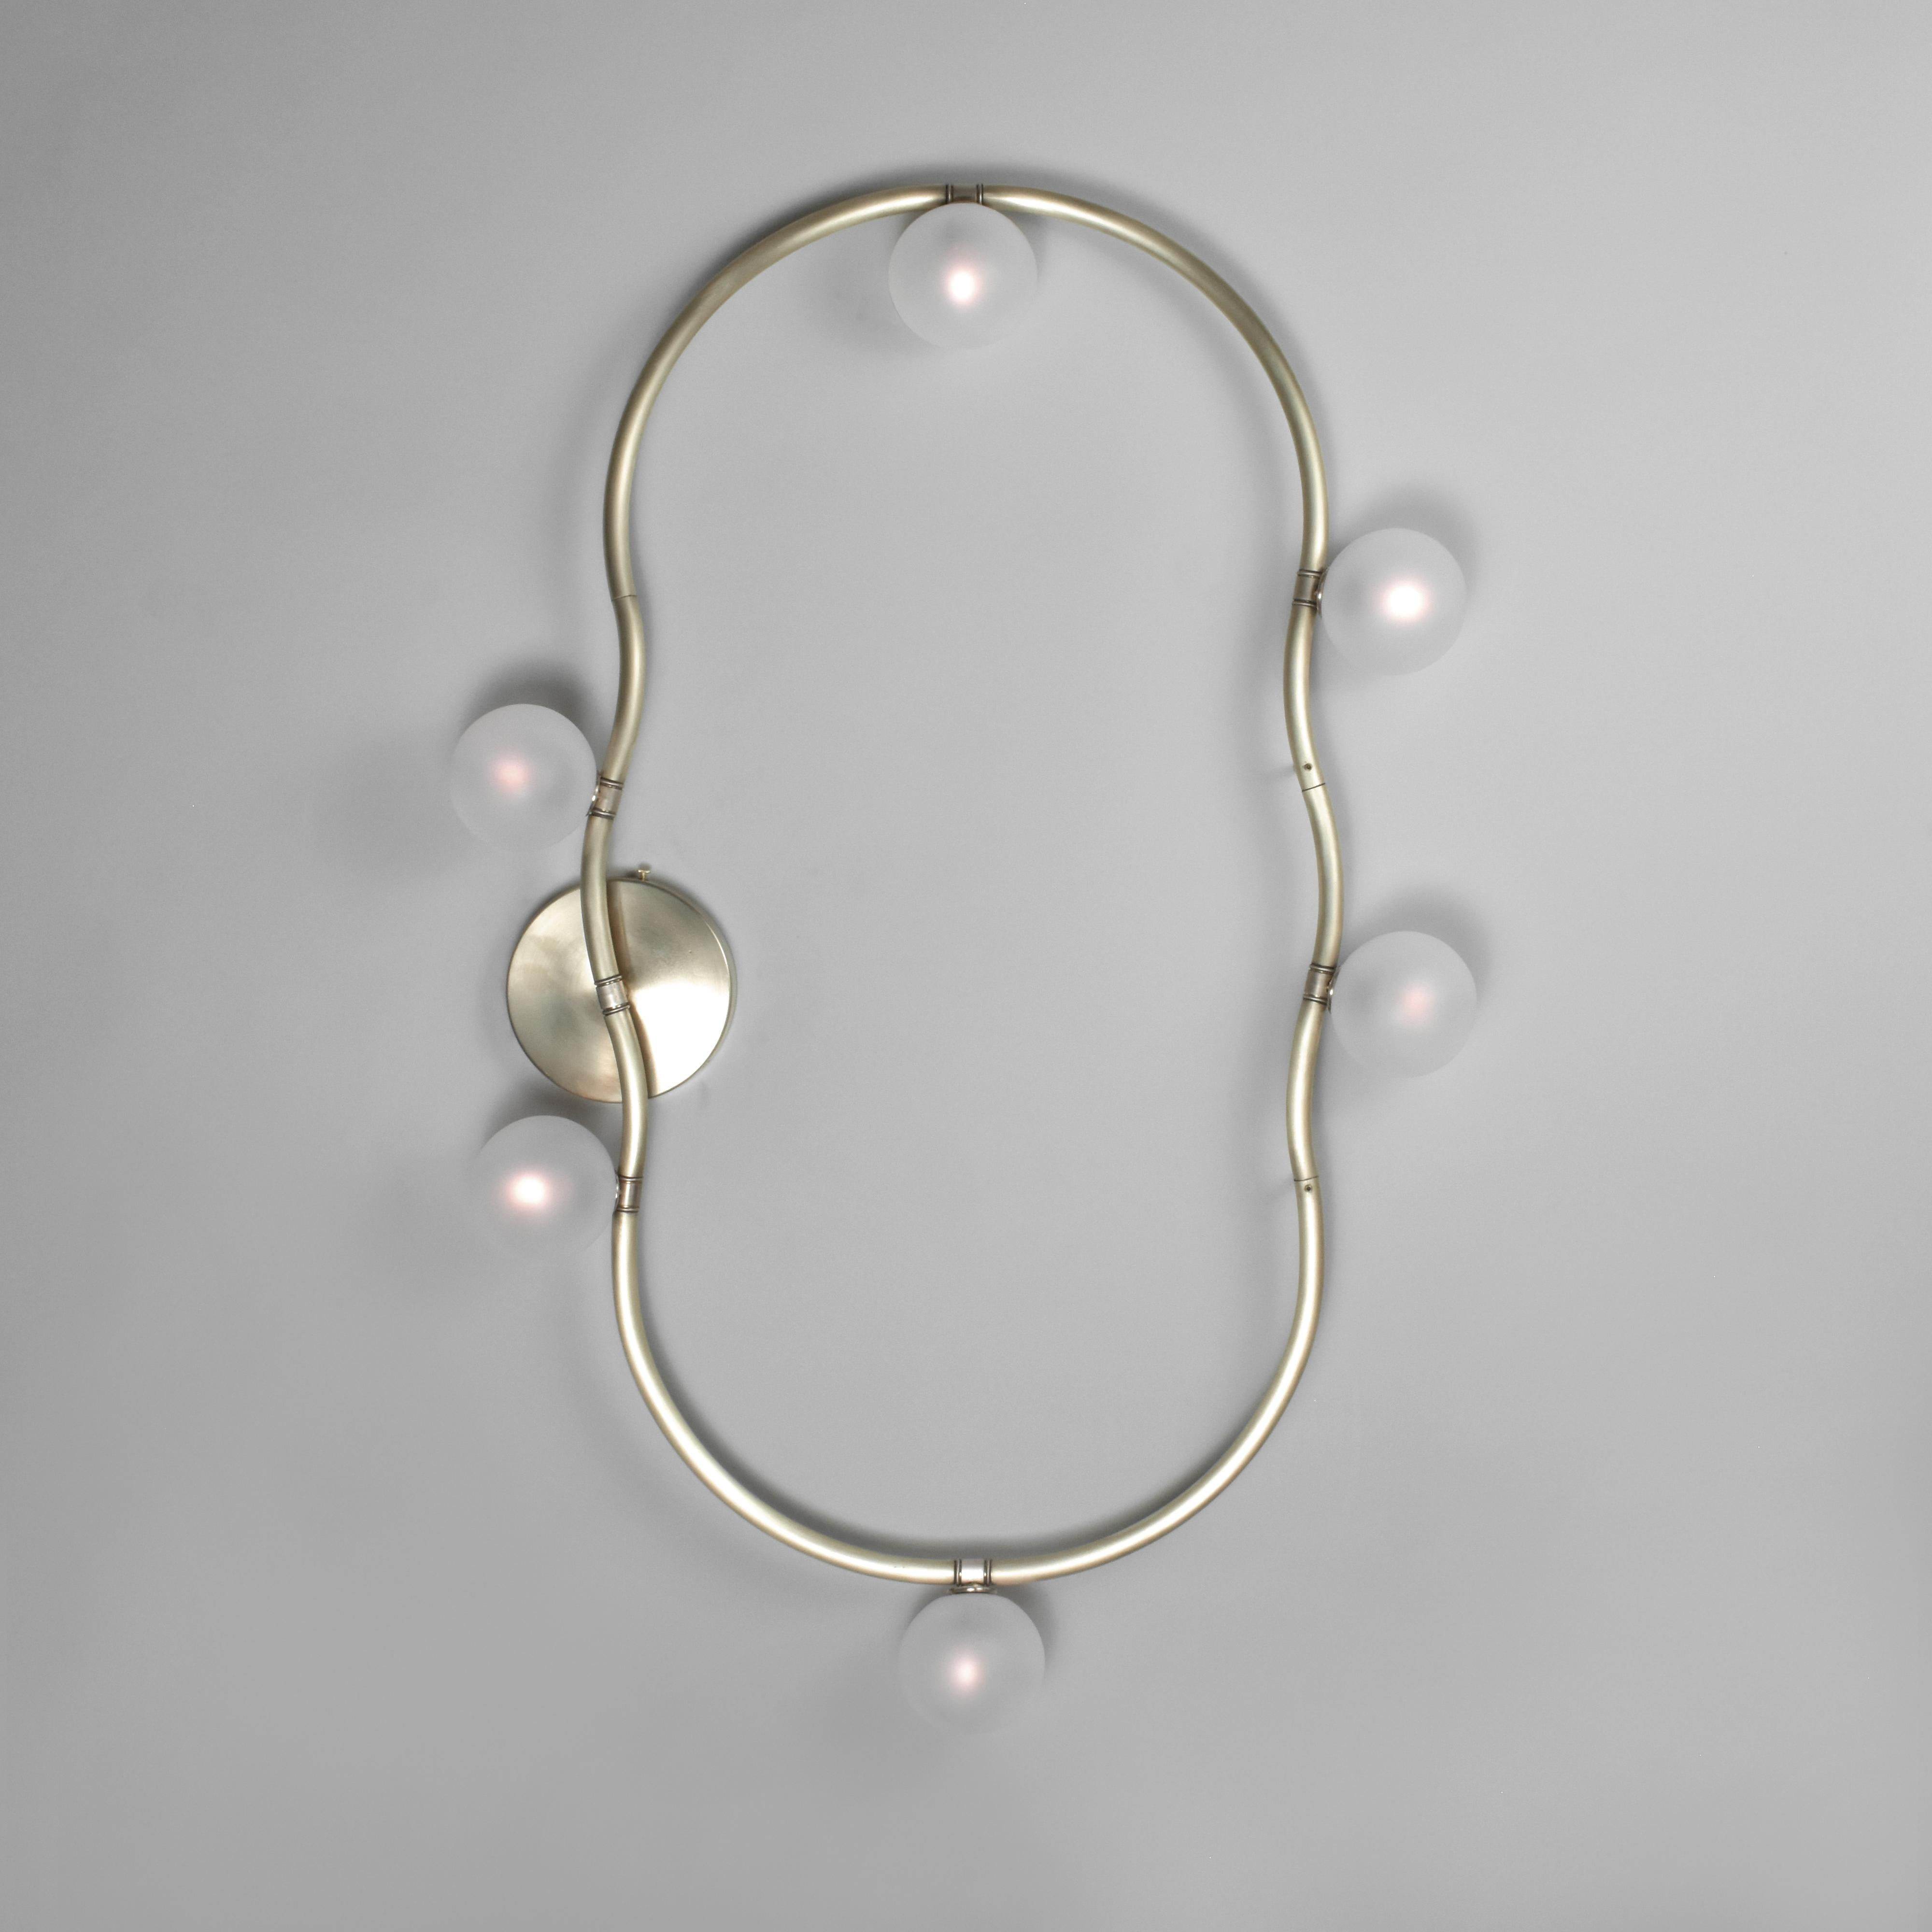 Contemporary Loop Light, Sconce or Ceiling Mount in Customizable Configurations For Sale